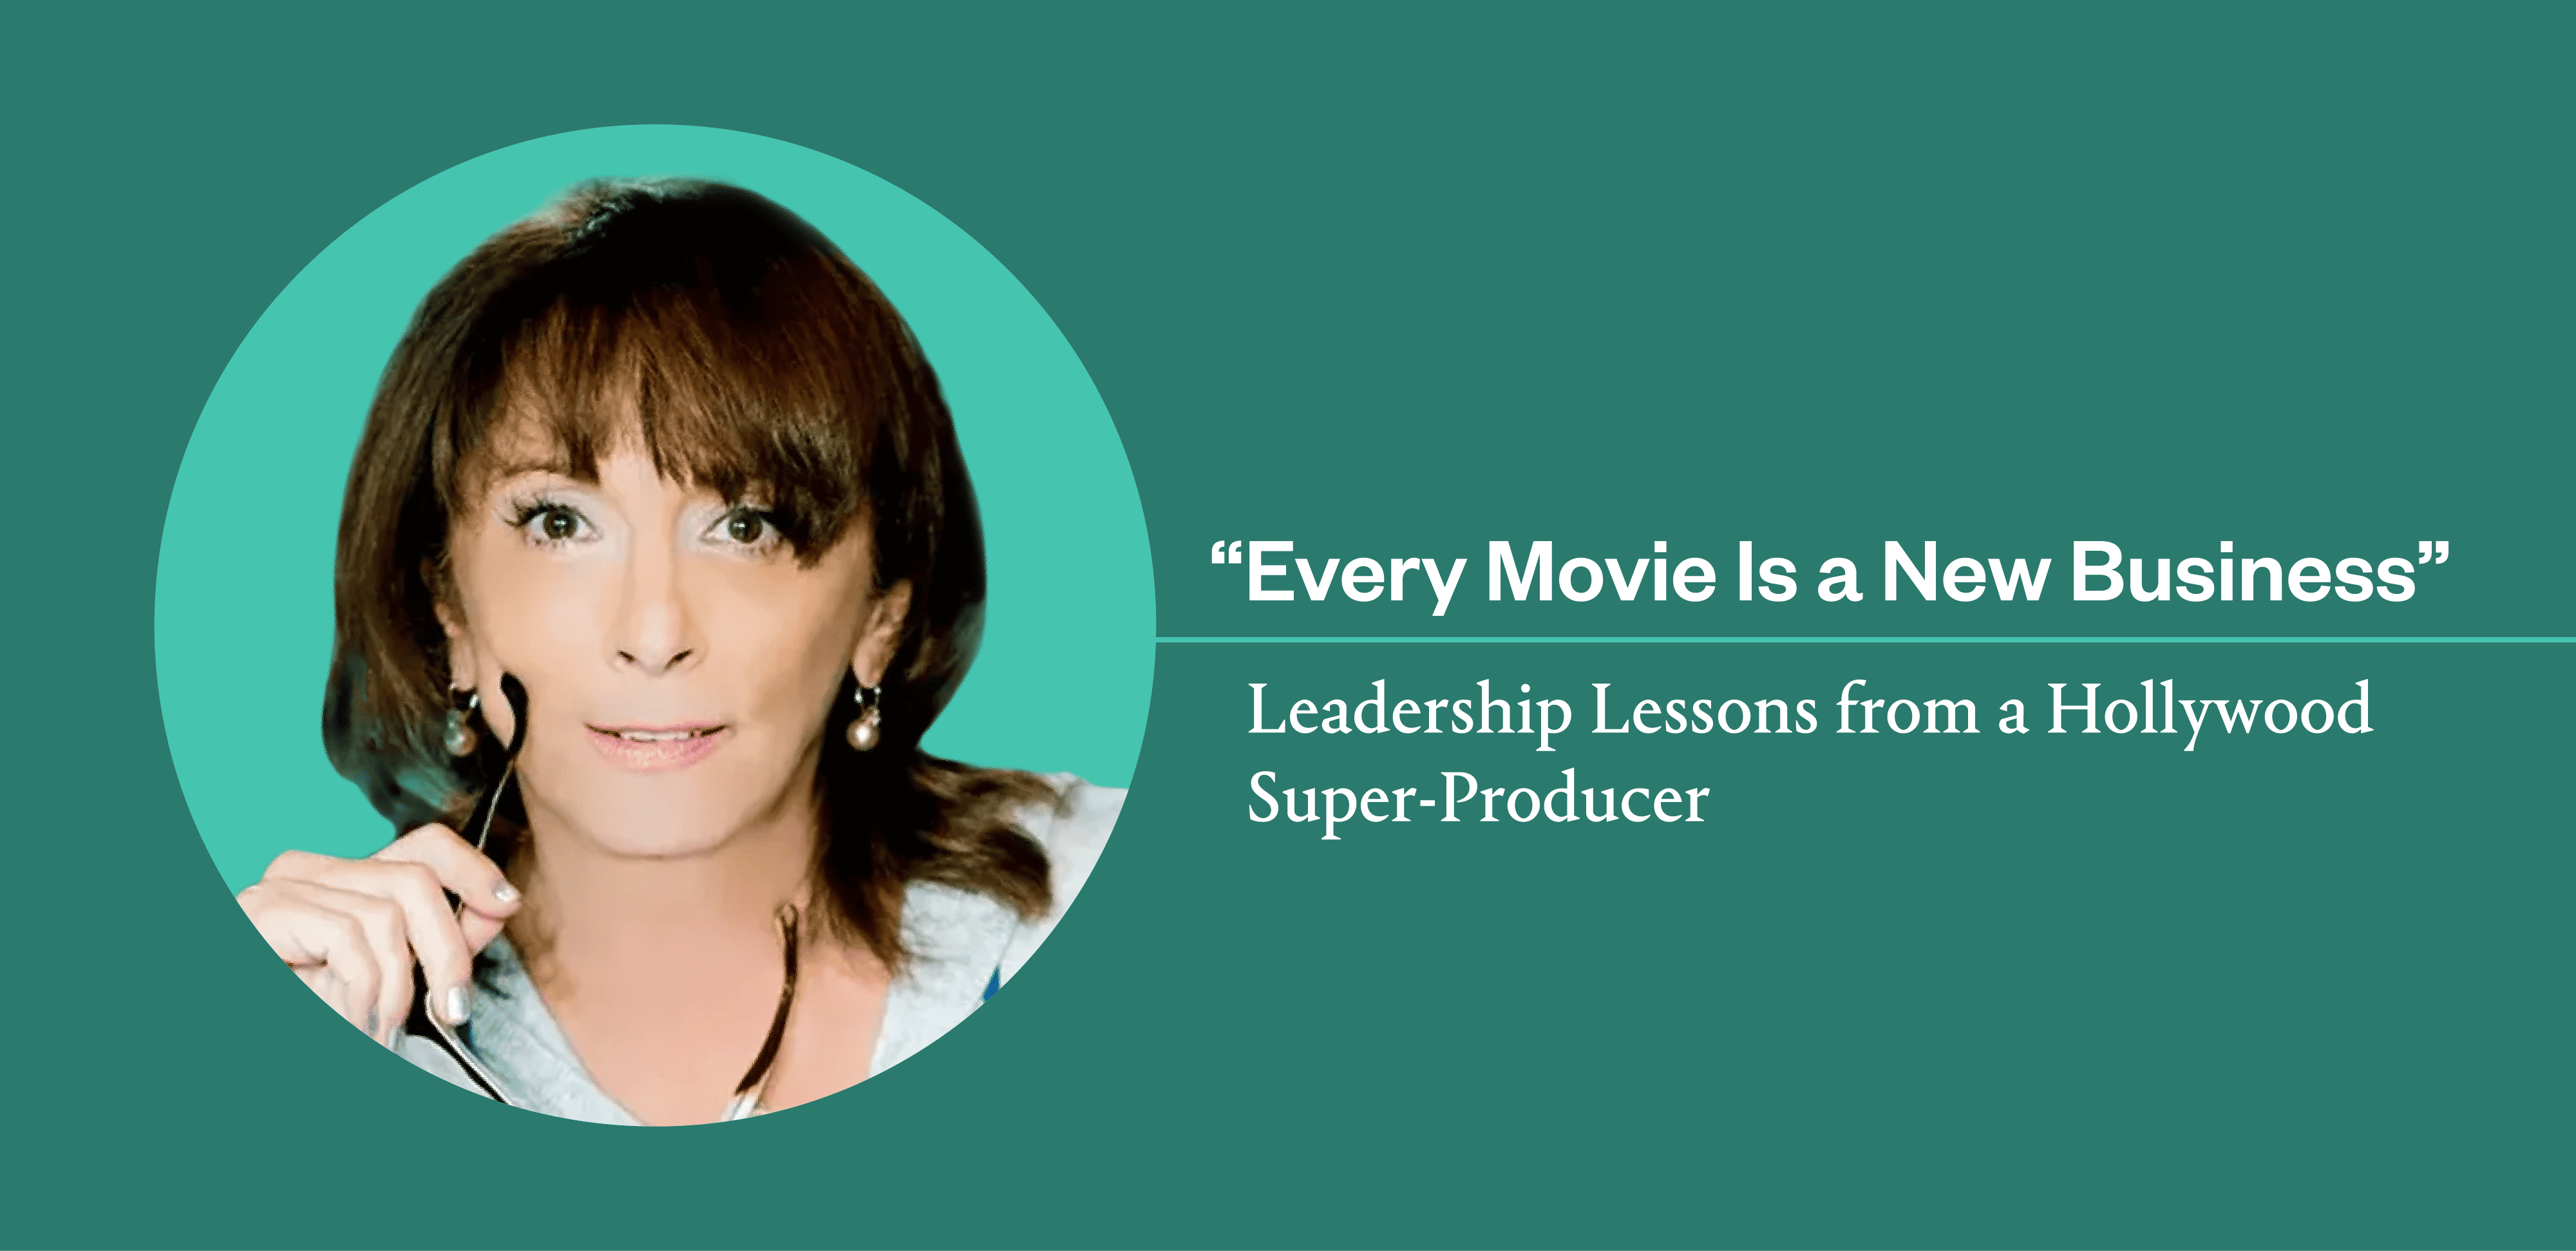 Leadership Lessons from Hollywood Super-Producer Lynda Obst: “Project Calm, so Nobody Makes the Fire Bigger”